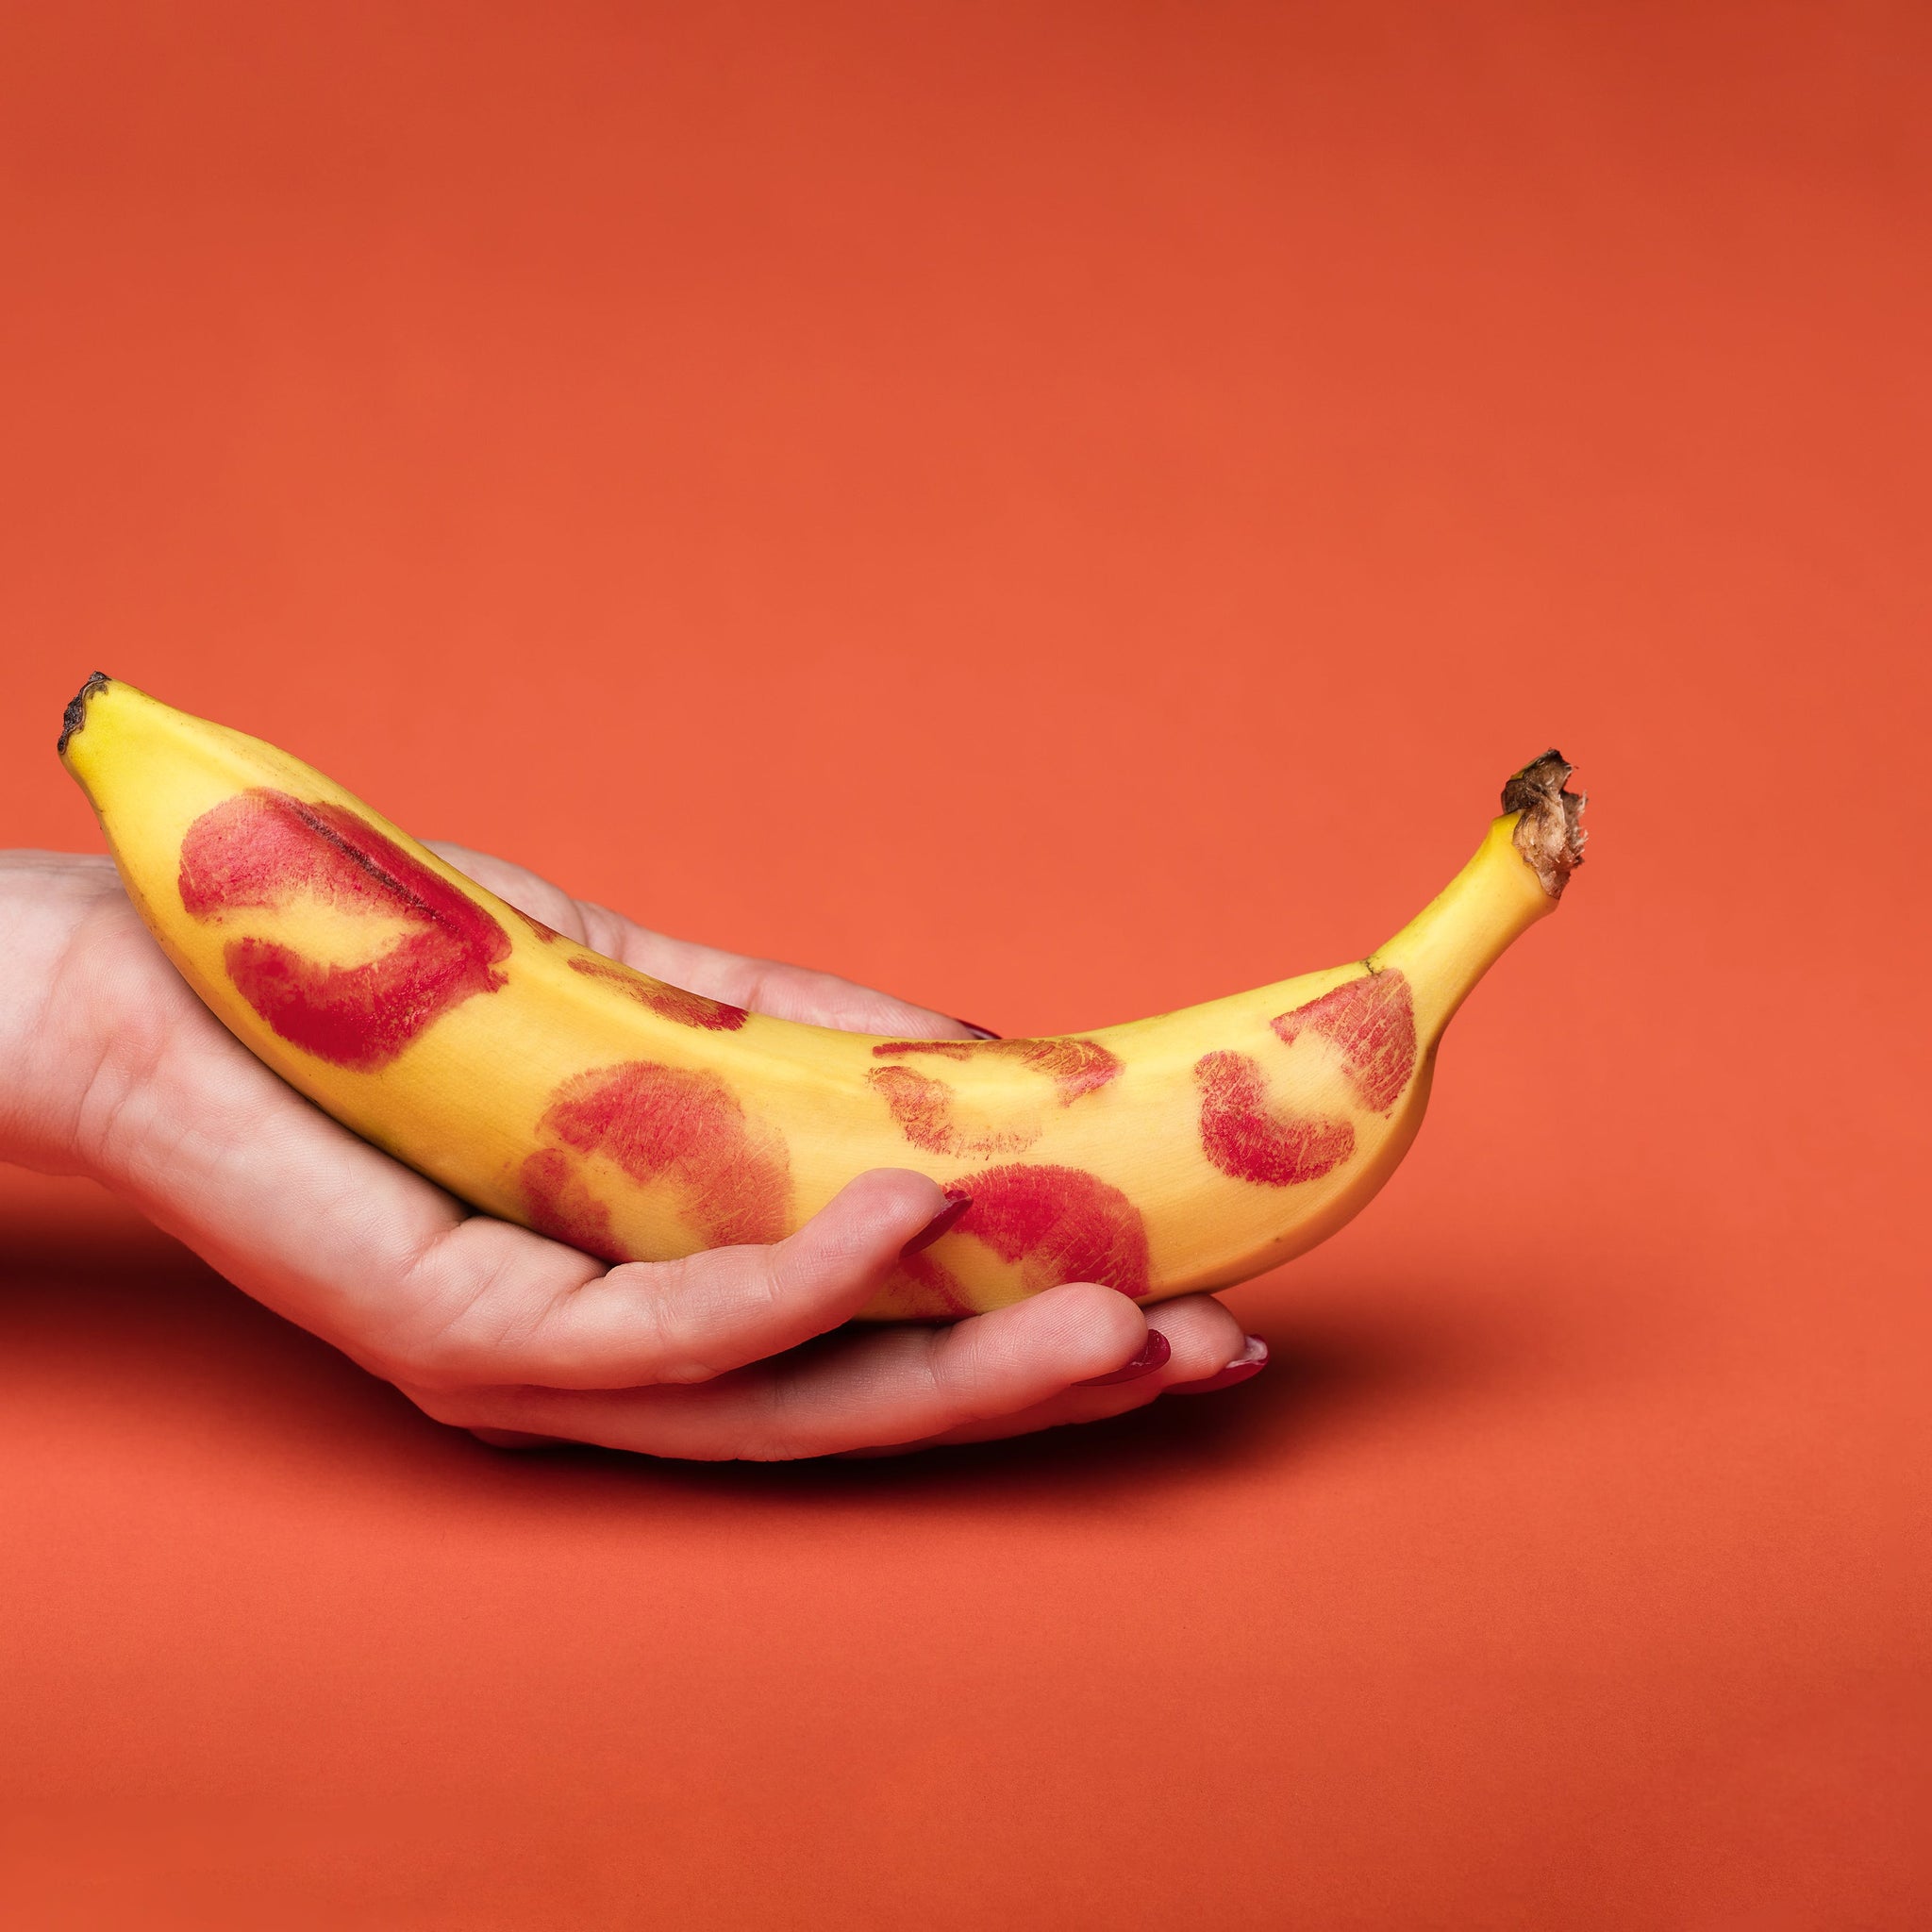 A person holding a yellow banana fruit